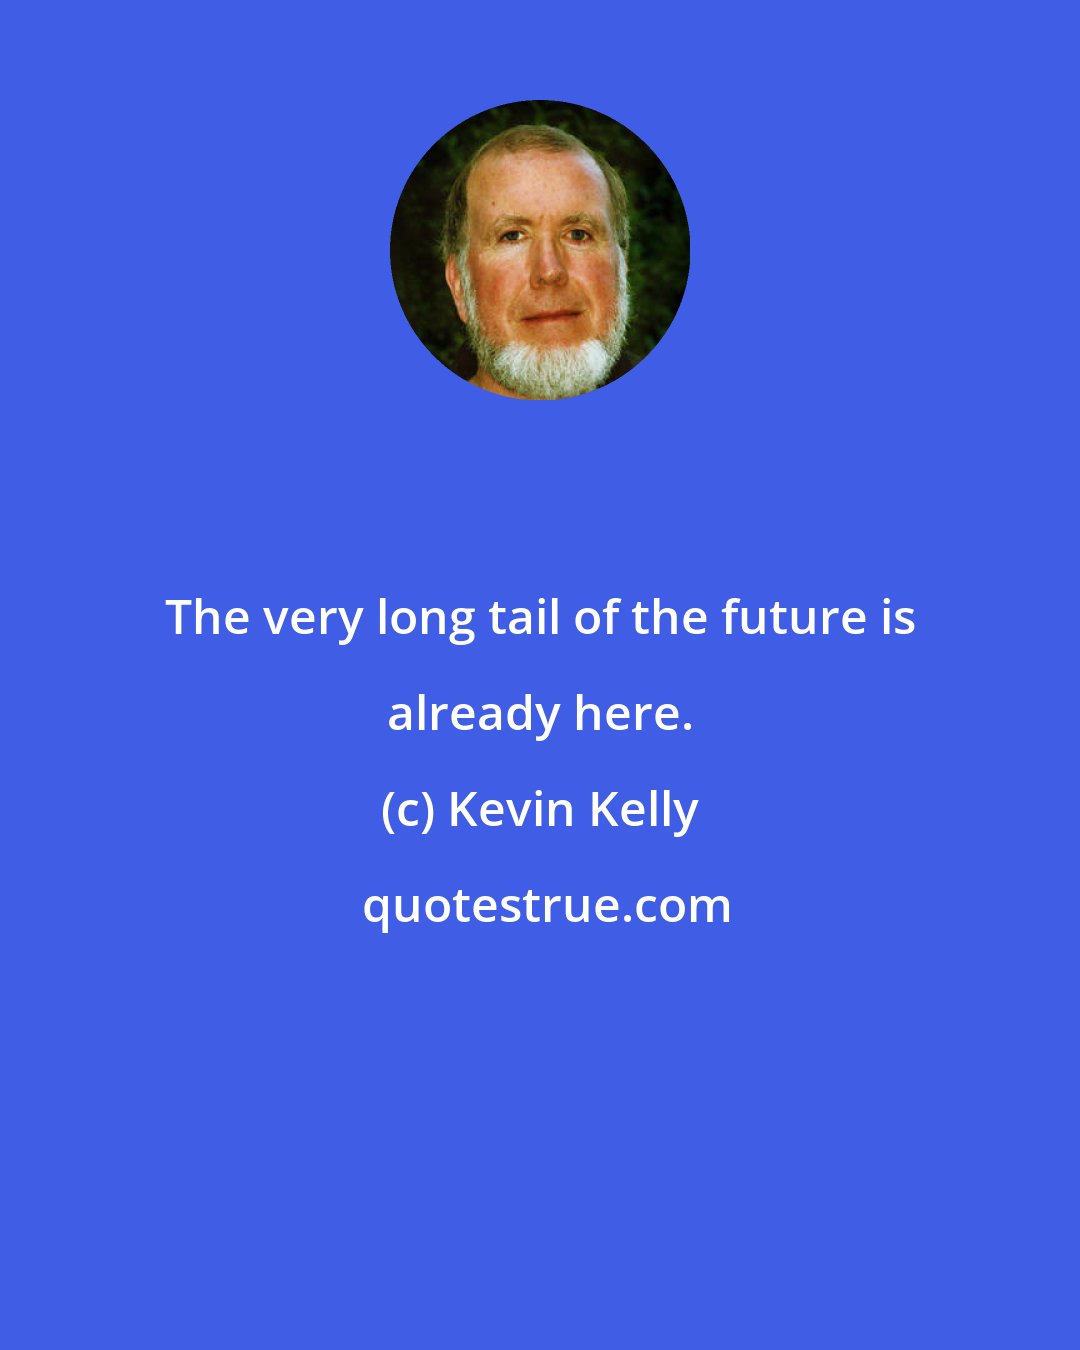 Kevin Kelly: The very long tail of the future is already here.